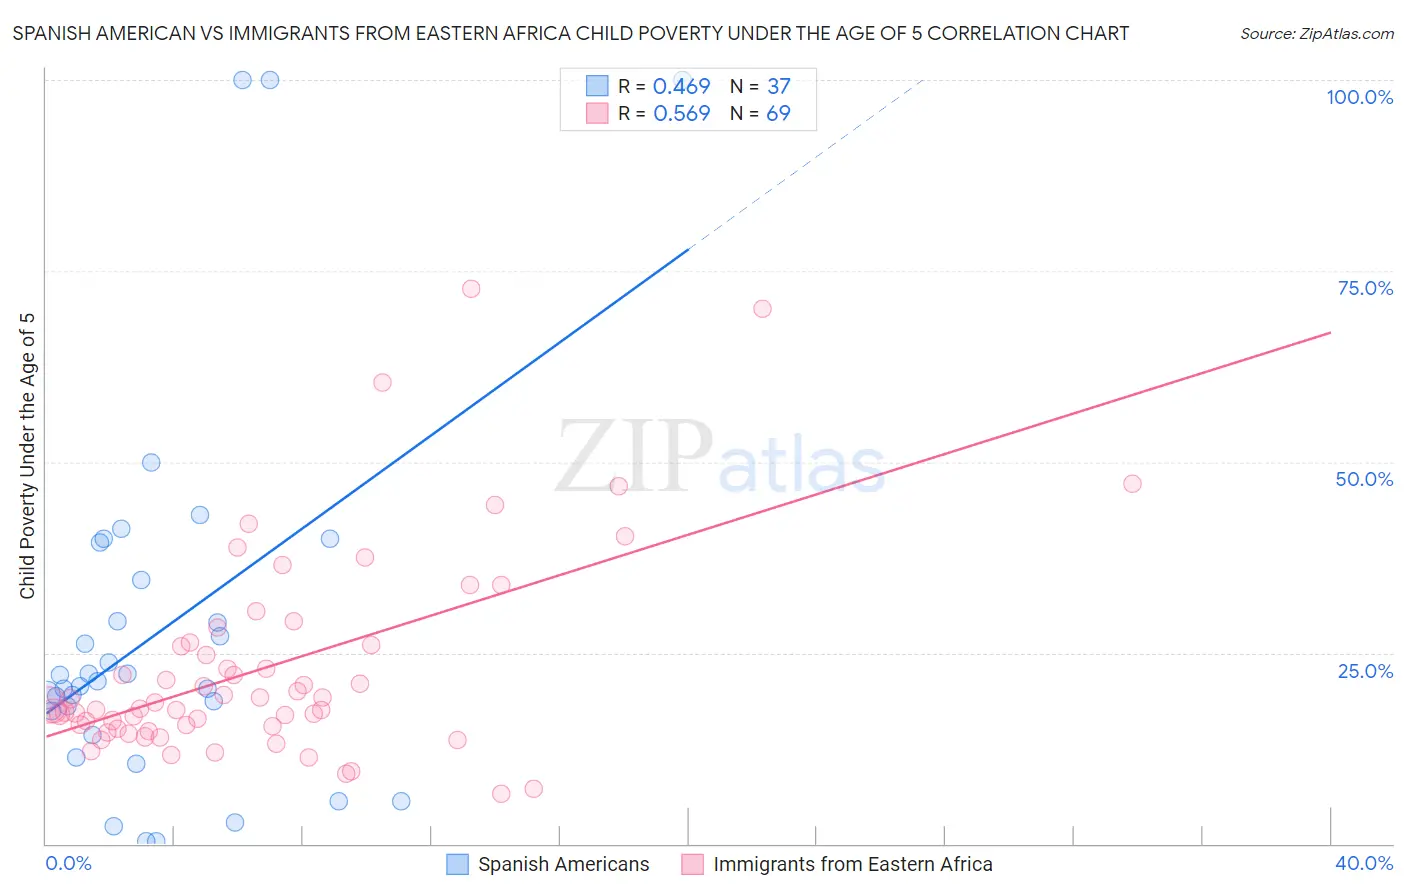 Spanish American vs Immigrants from Eastern Africa Child Poverty Under the Age of 5